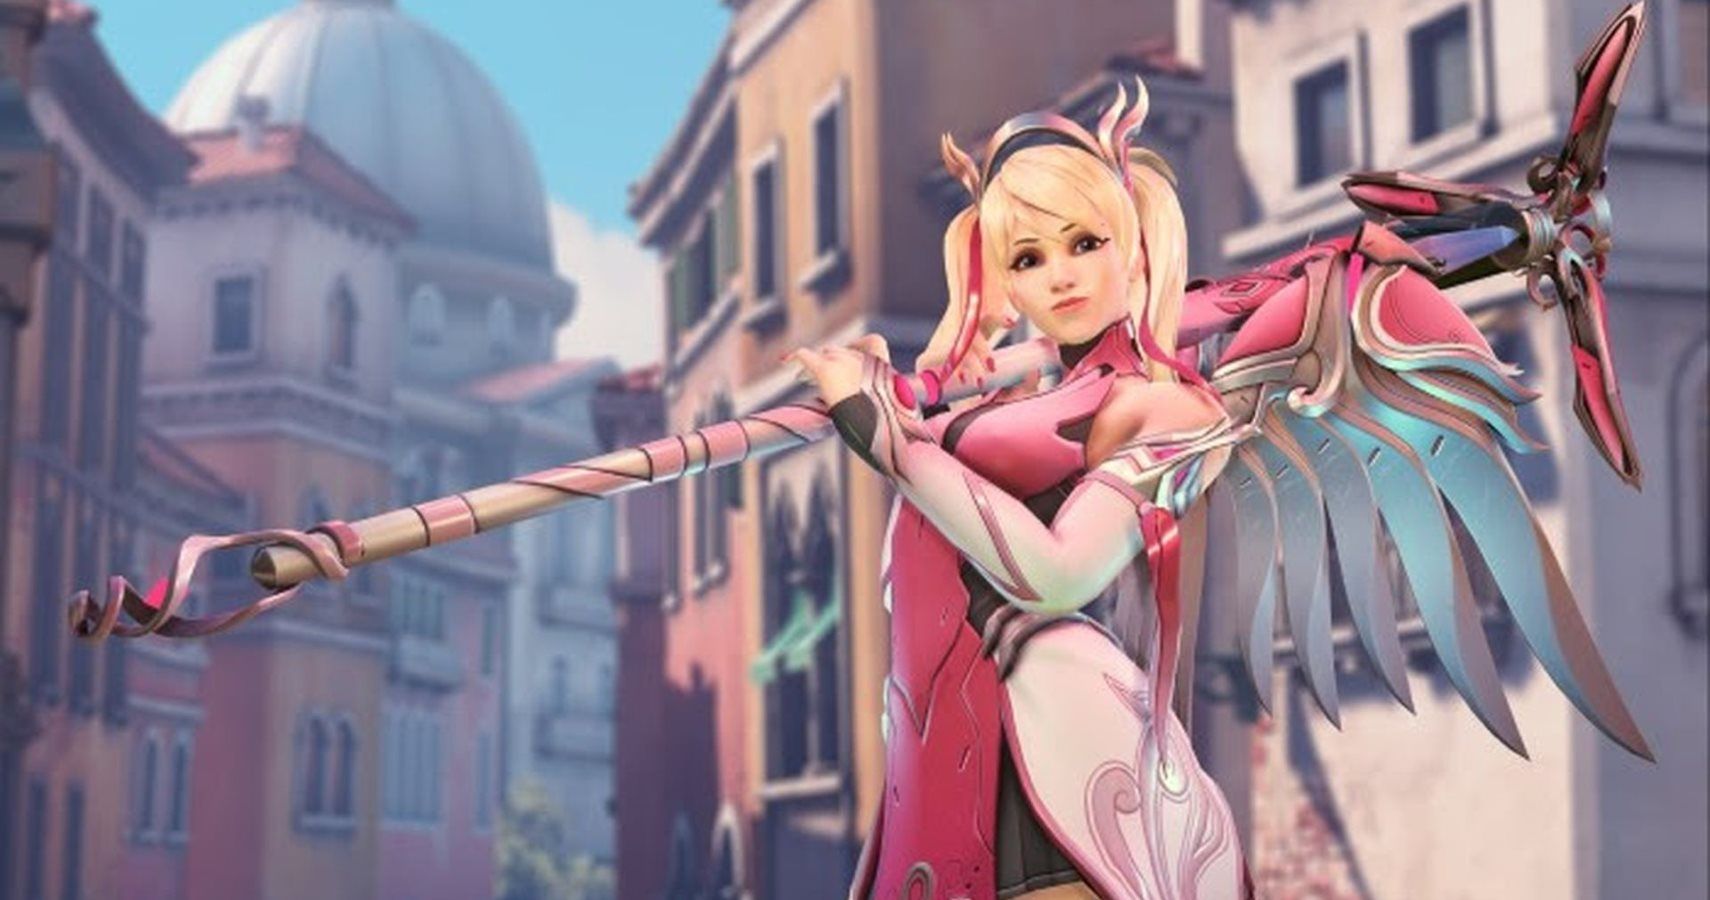 Overwatch's Pink Mercy Skin Raised More Than $12 Million For Breast Cancer Foundation